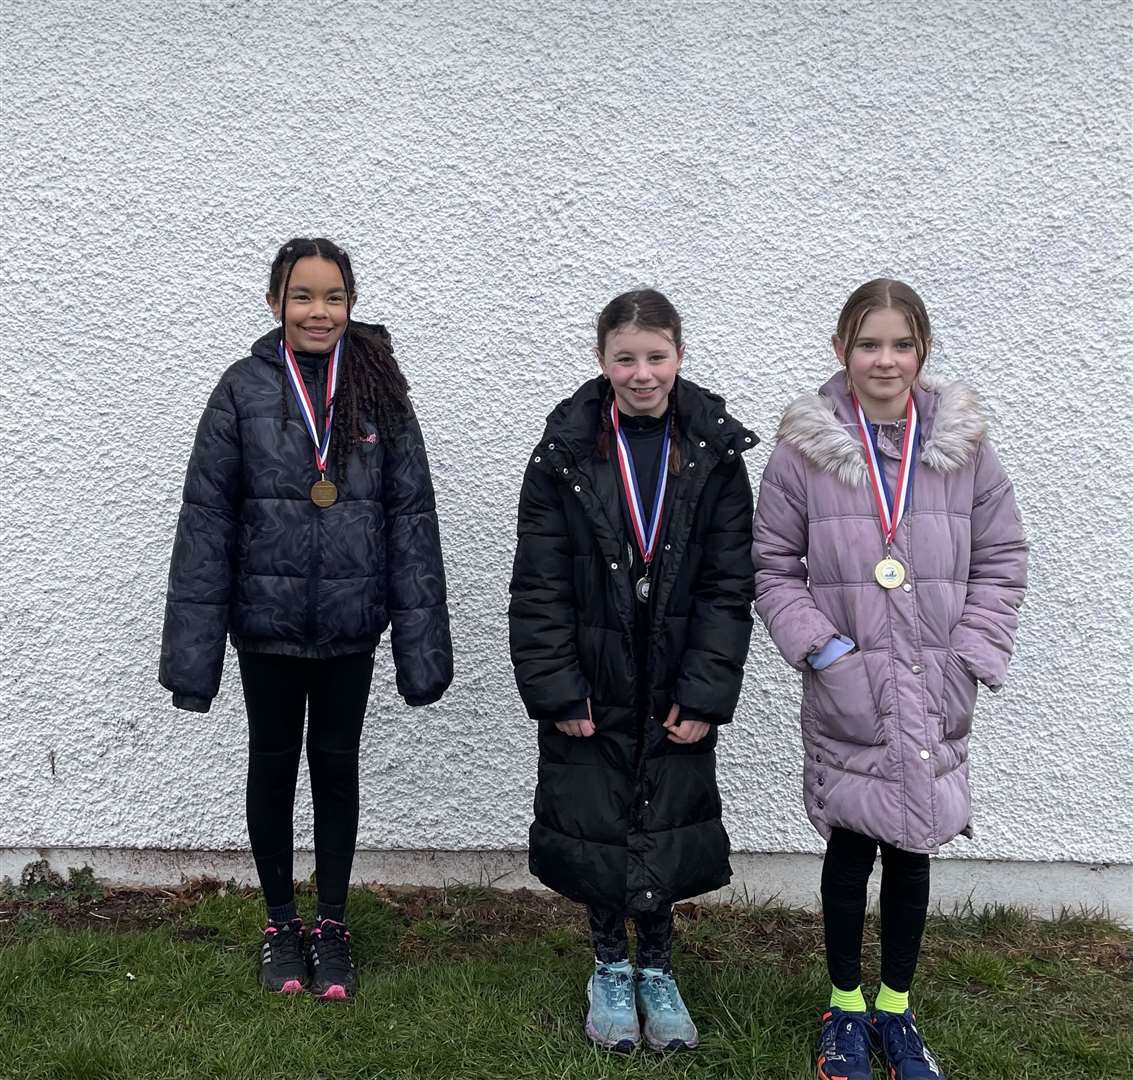 In the P6/7 girls, Ramina Rowe was third, Emily Offer second and Rhiann Gomez was the winner.